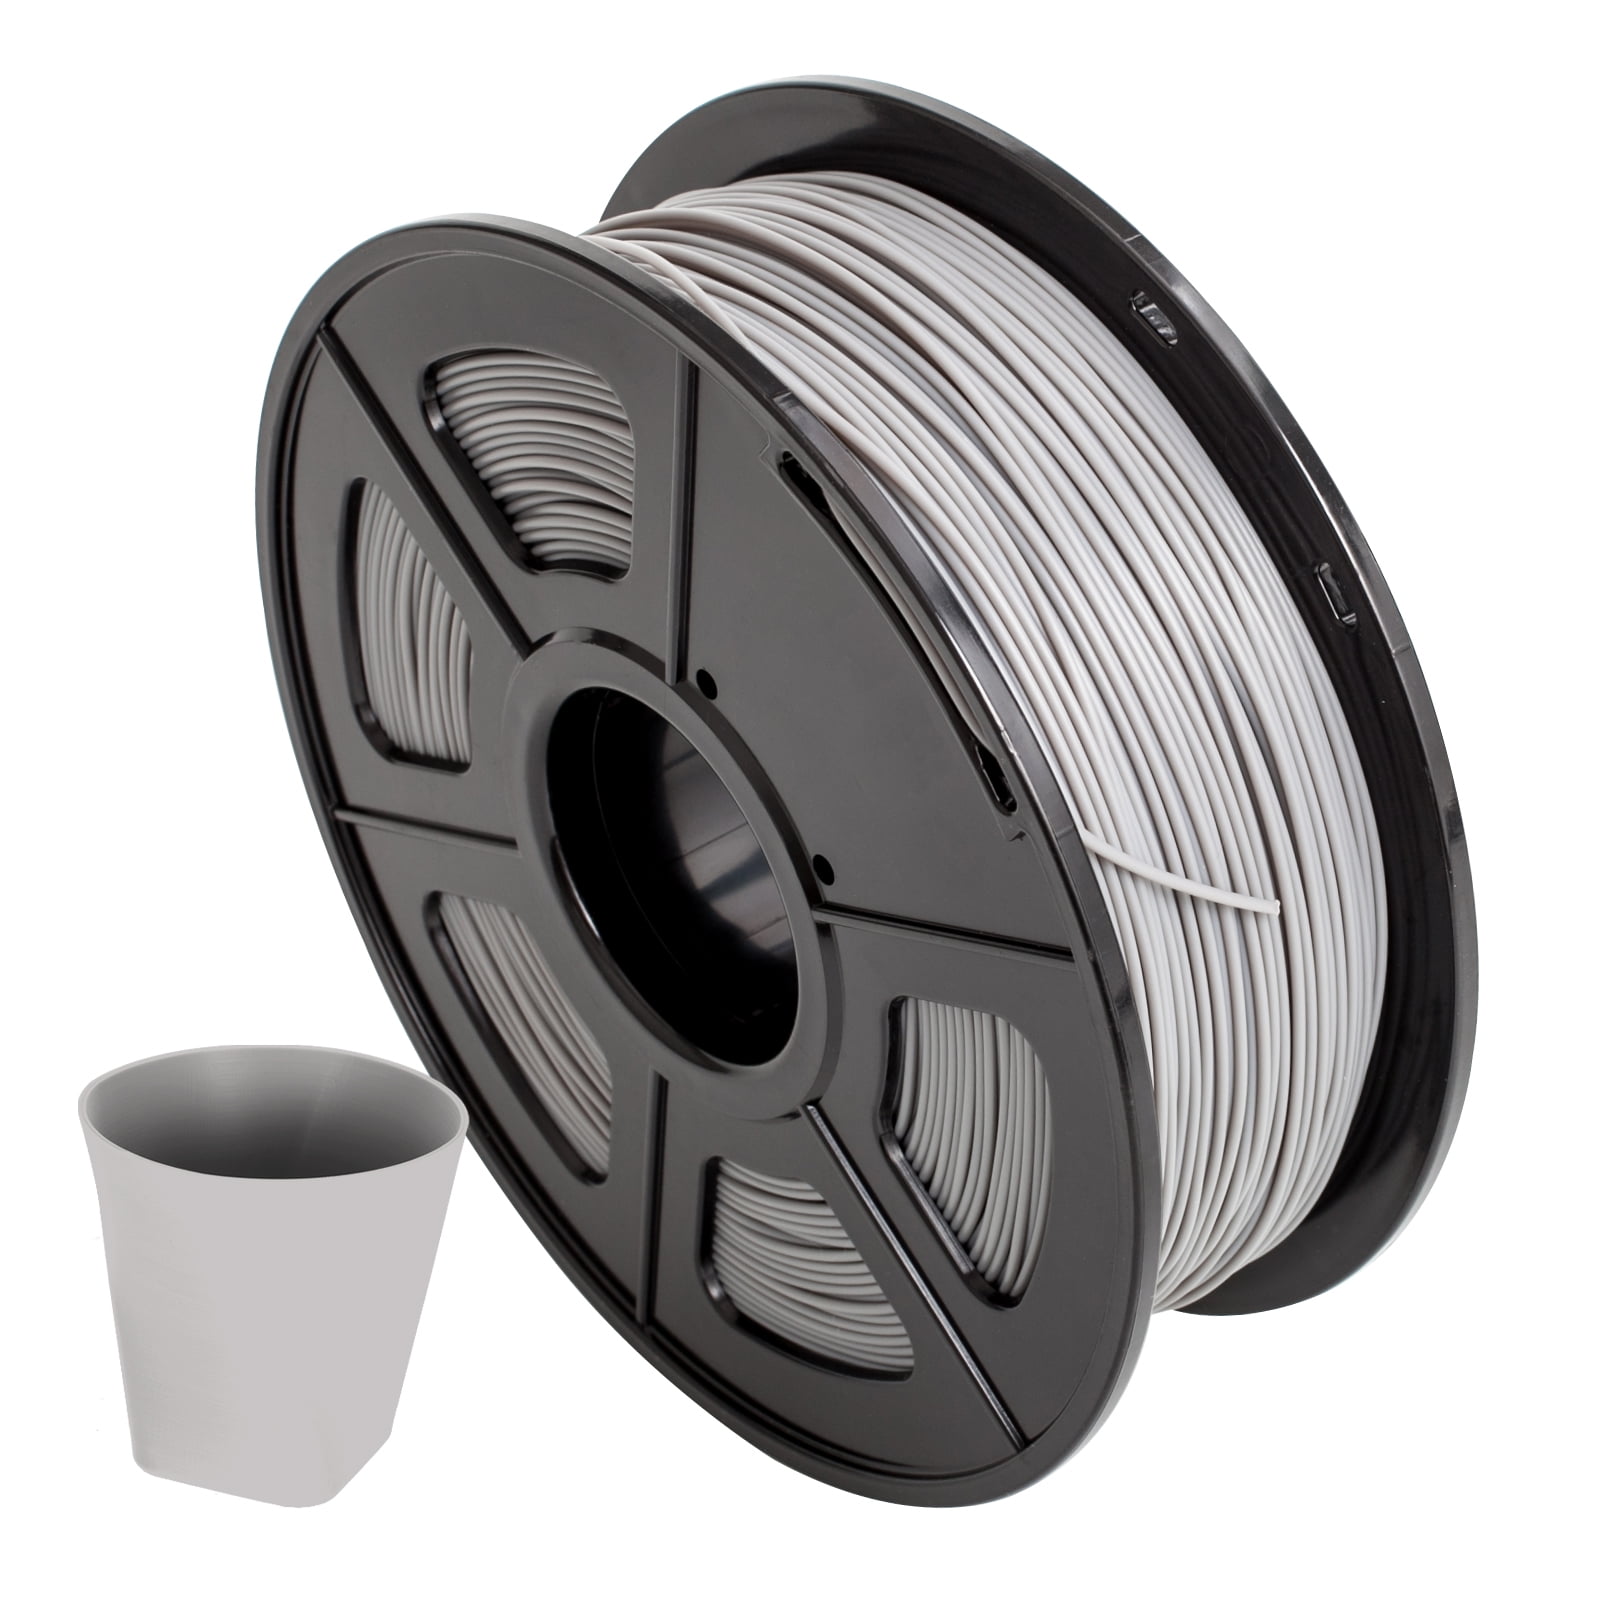 White ANYCUBIC 3D Printer PLA Filament,1.75mm Dimensional Accuracy / 0.02 mm 1kg Spool PLA Filament for Most 3D Printers